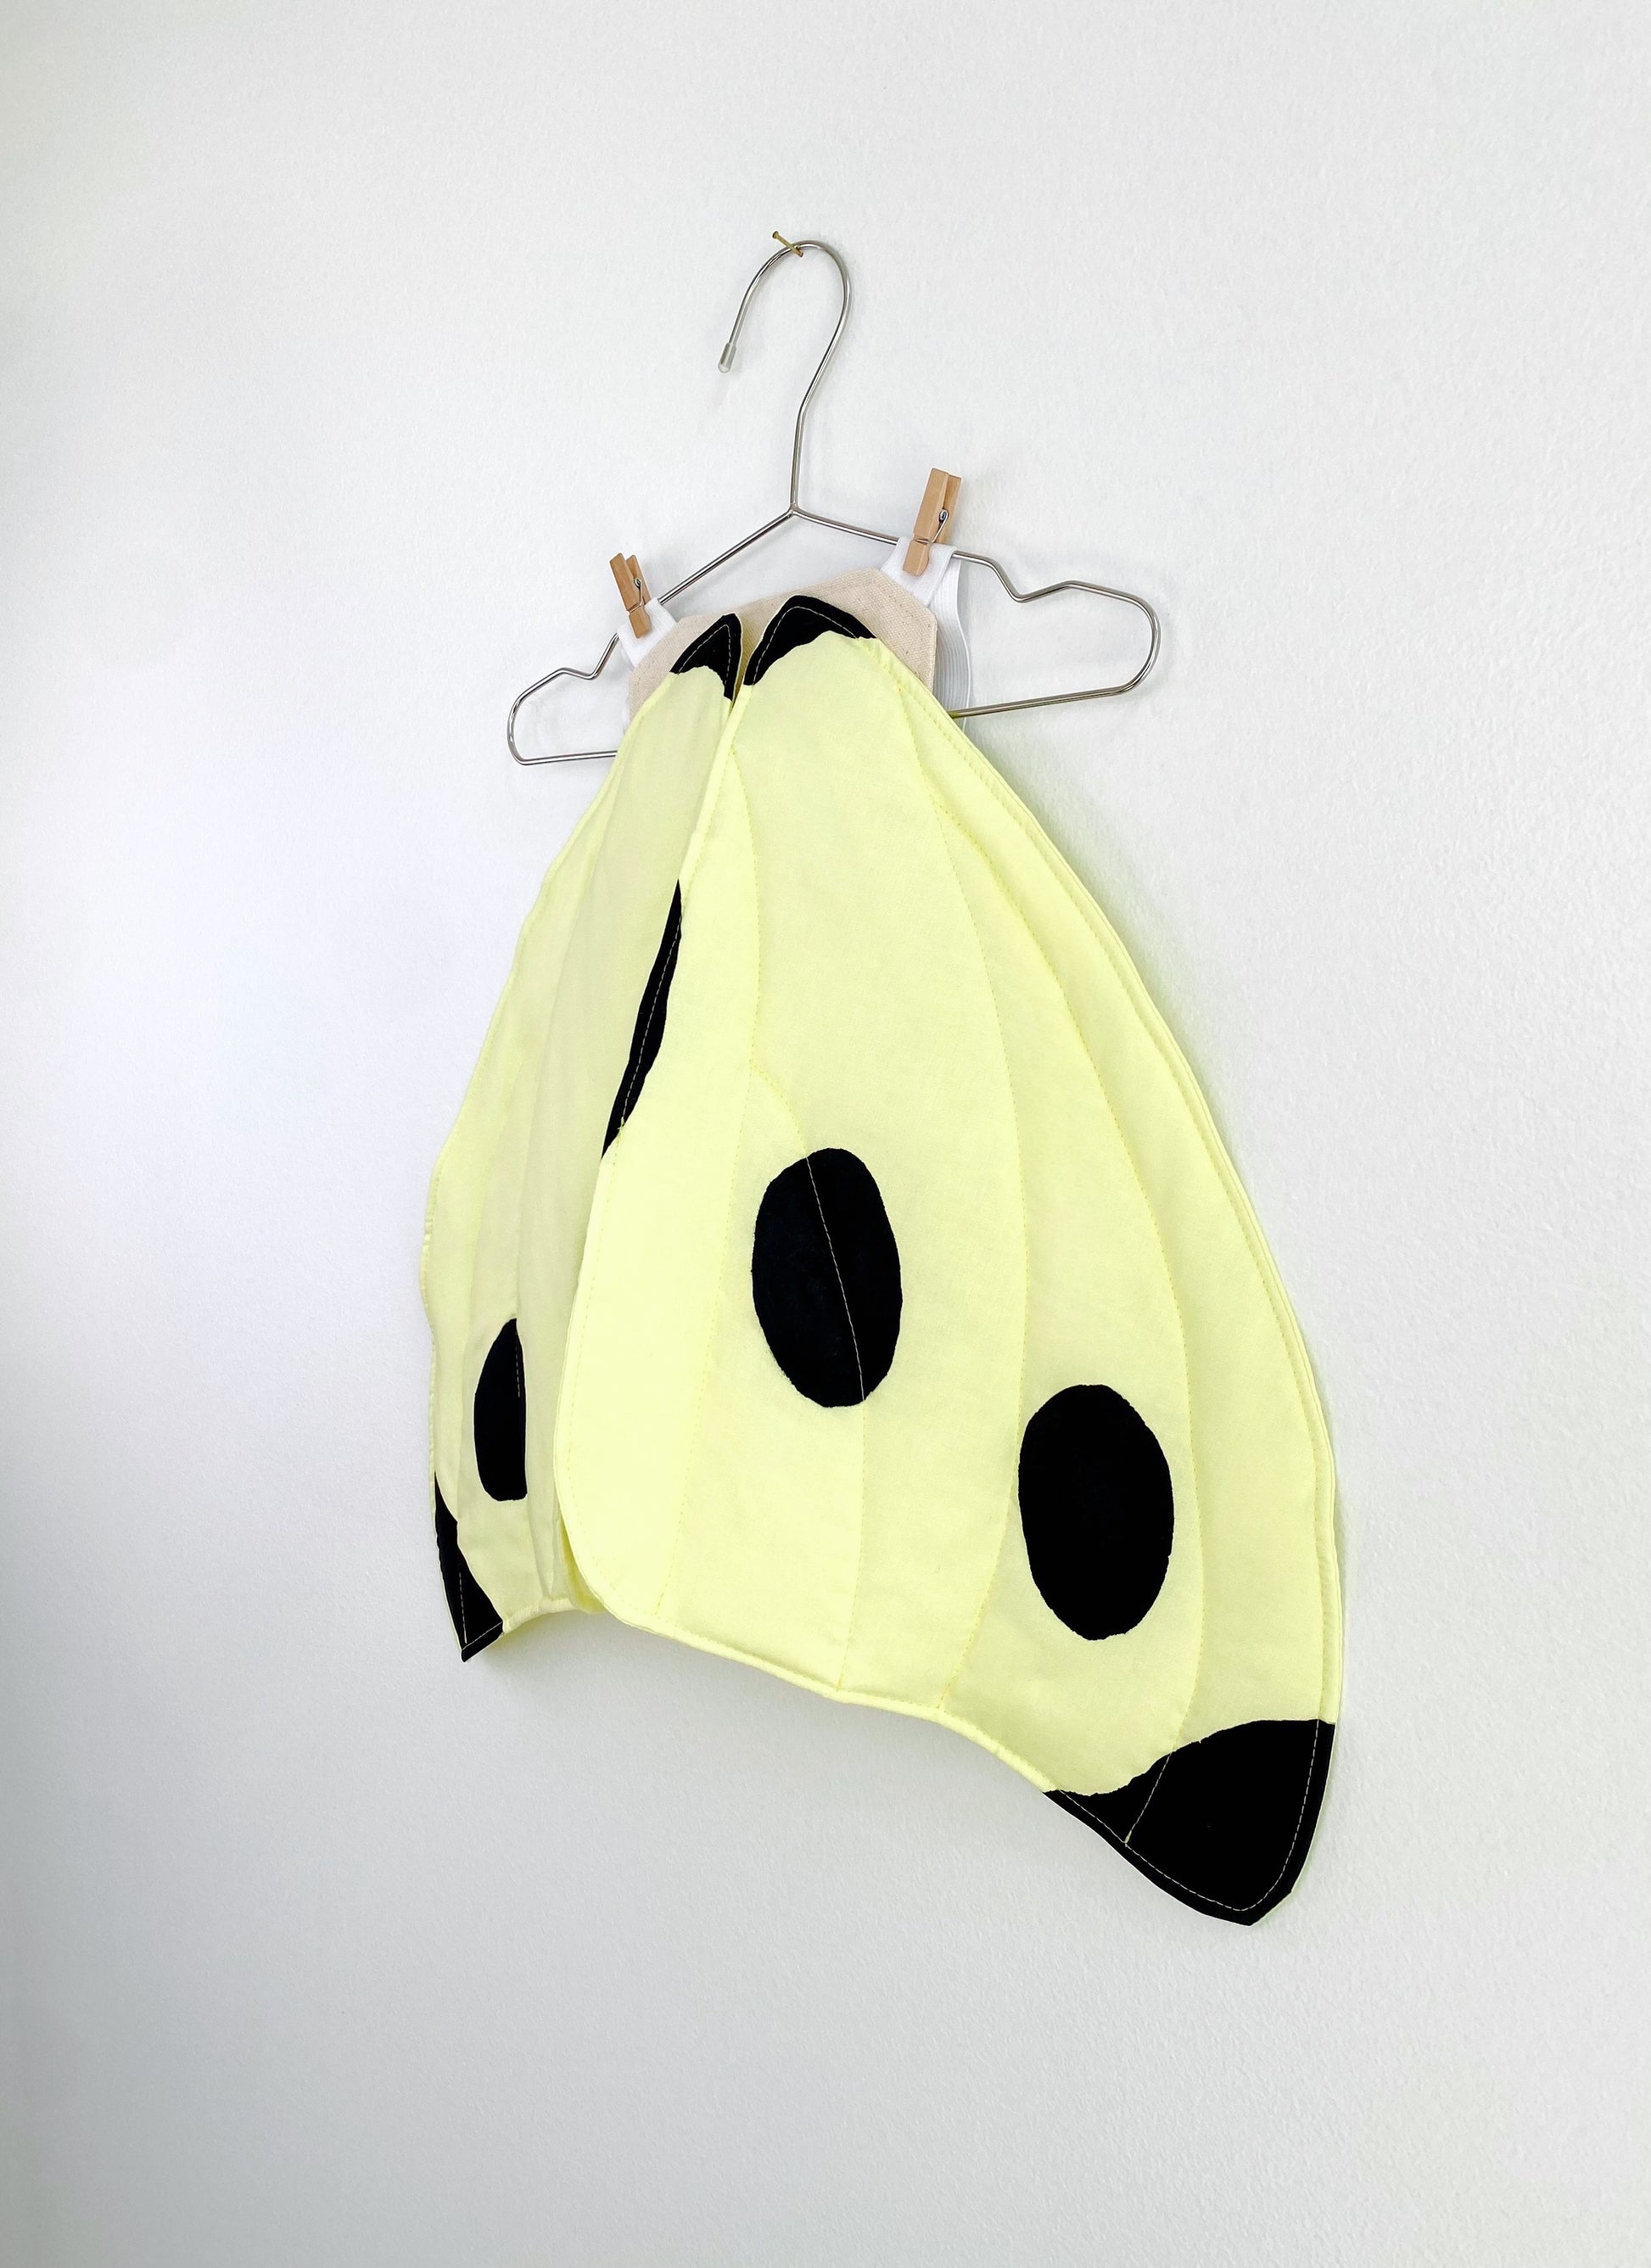 Black and yellow butterfly wings for a flying butterfly toy.